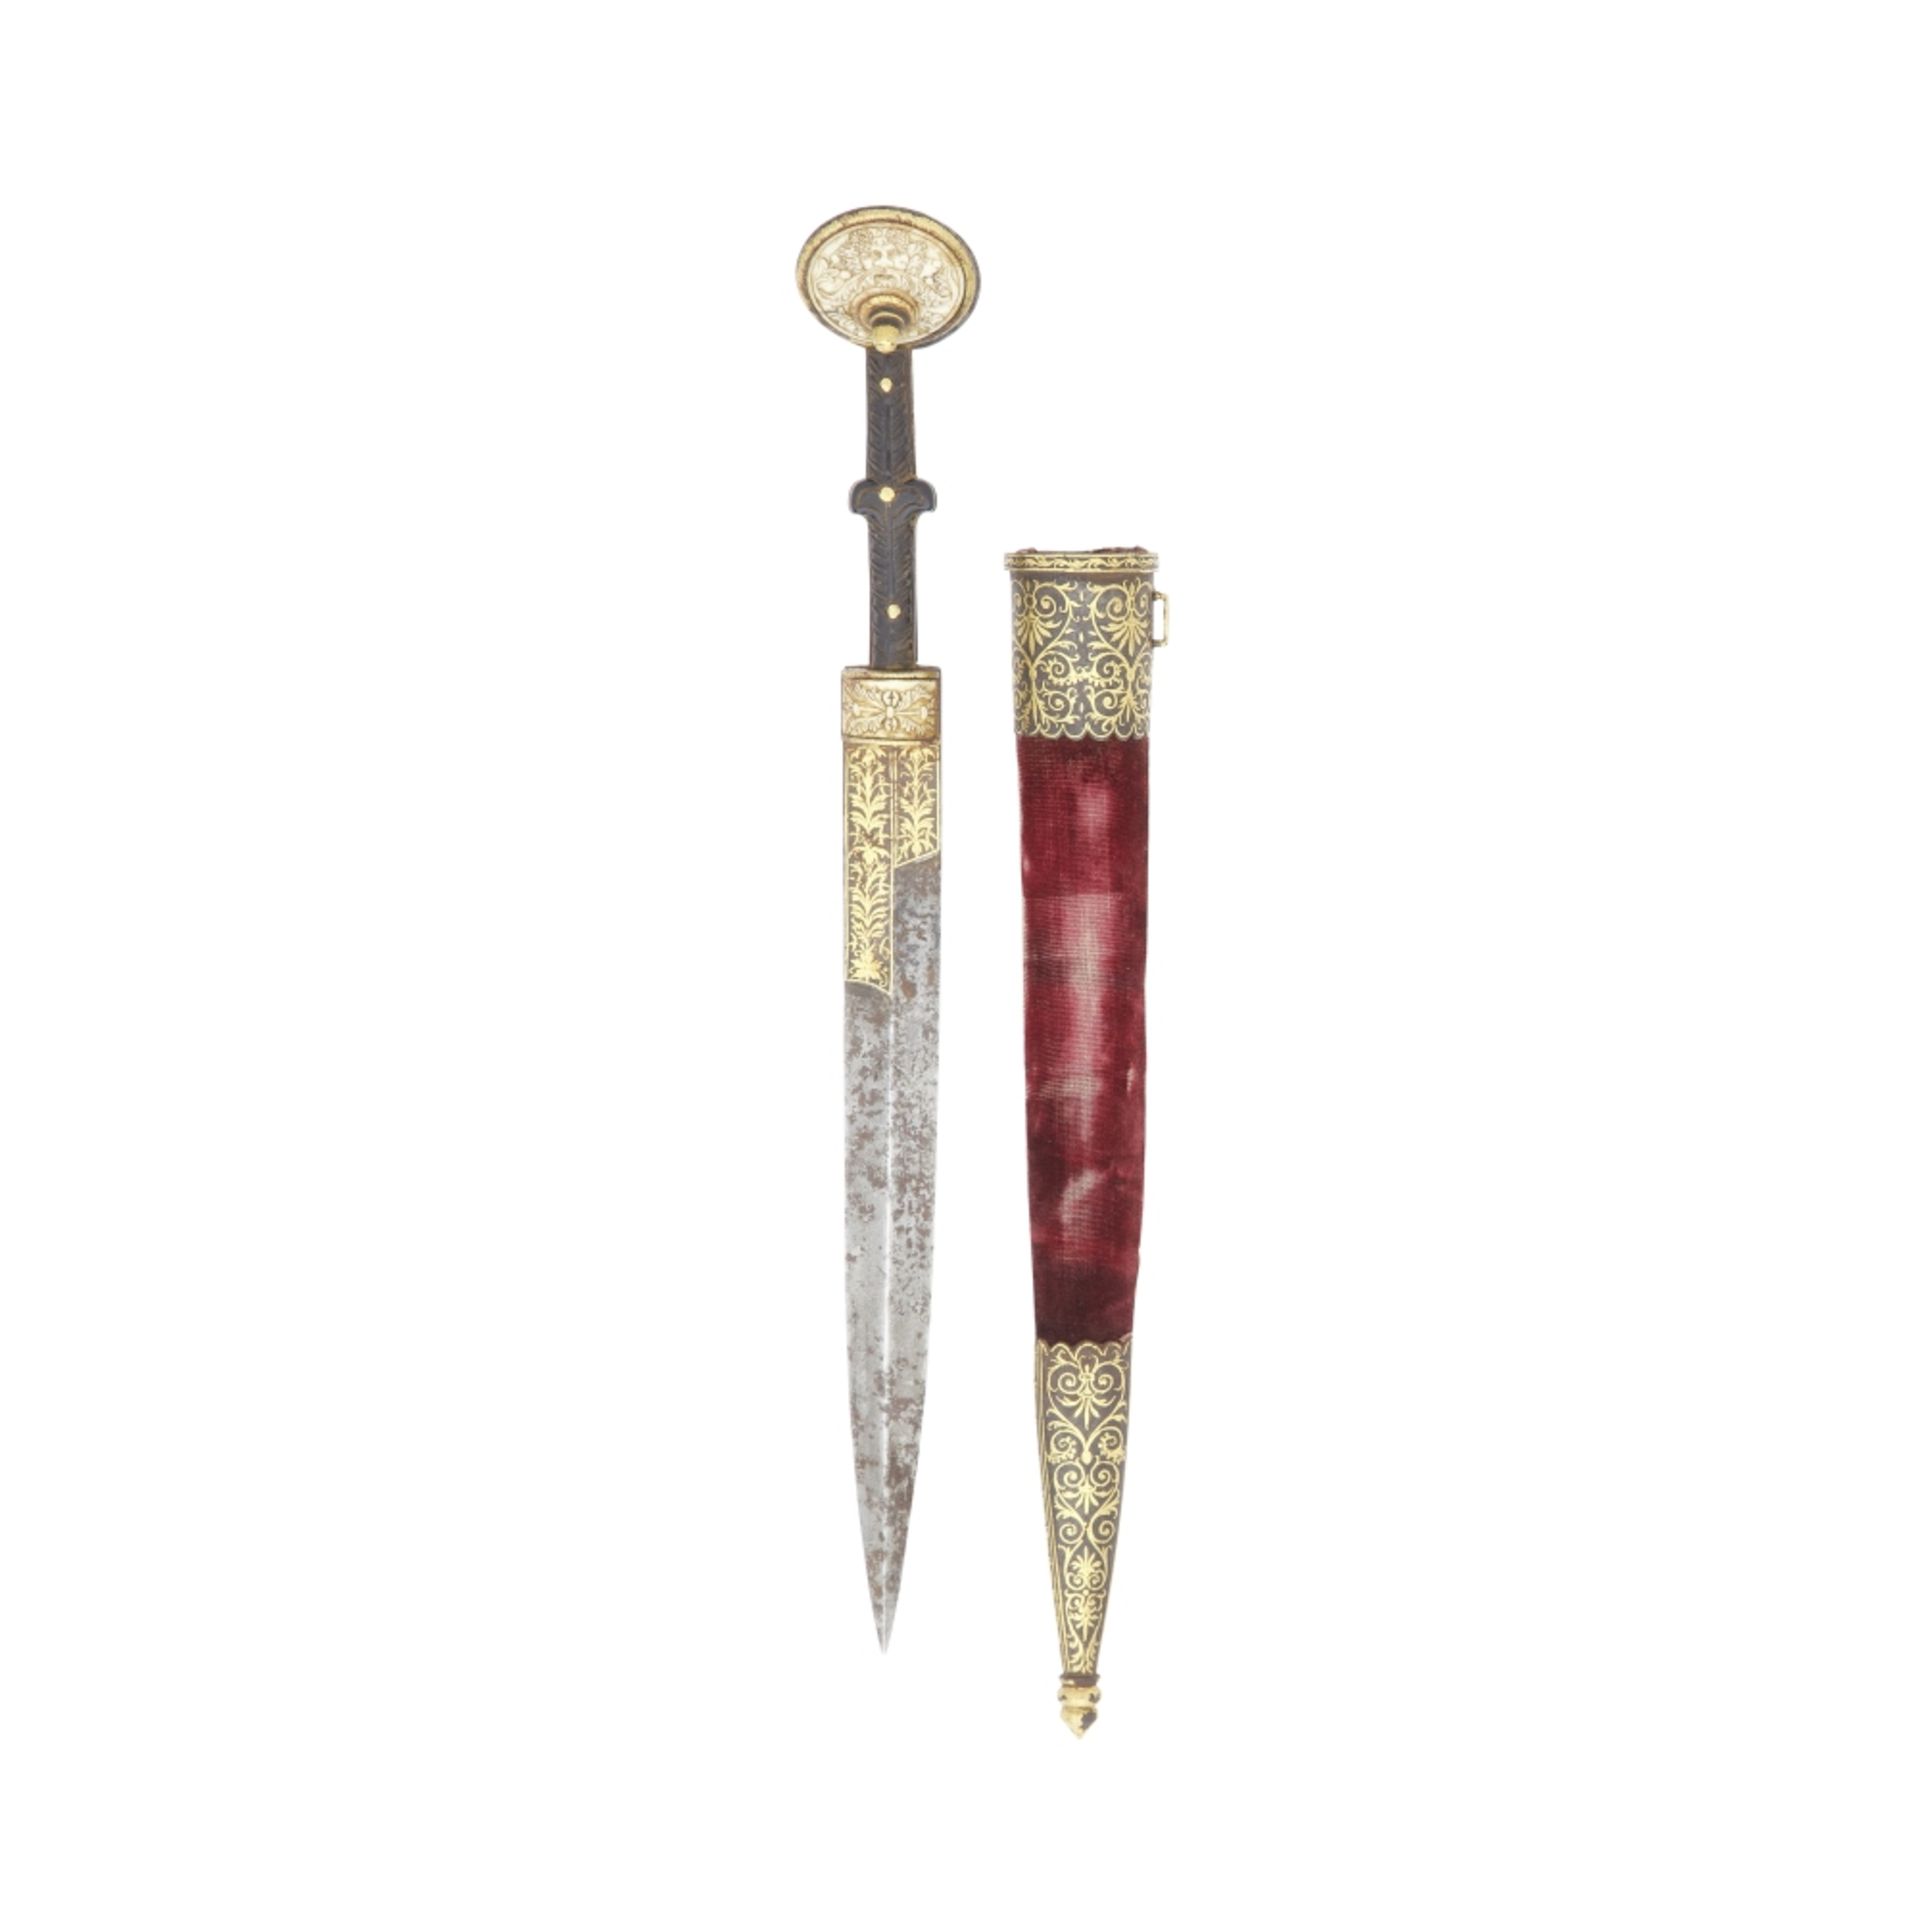 A Highly Decorated Ear-Dagger or Venetian Style Of The Late 15th/Early 16th Century